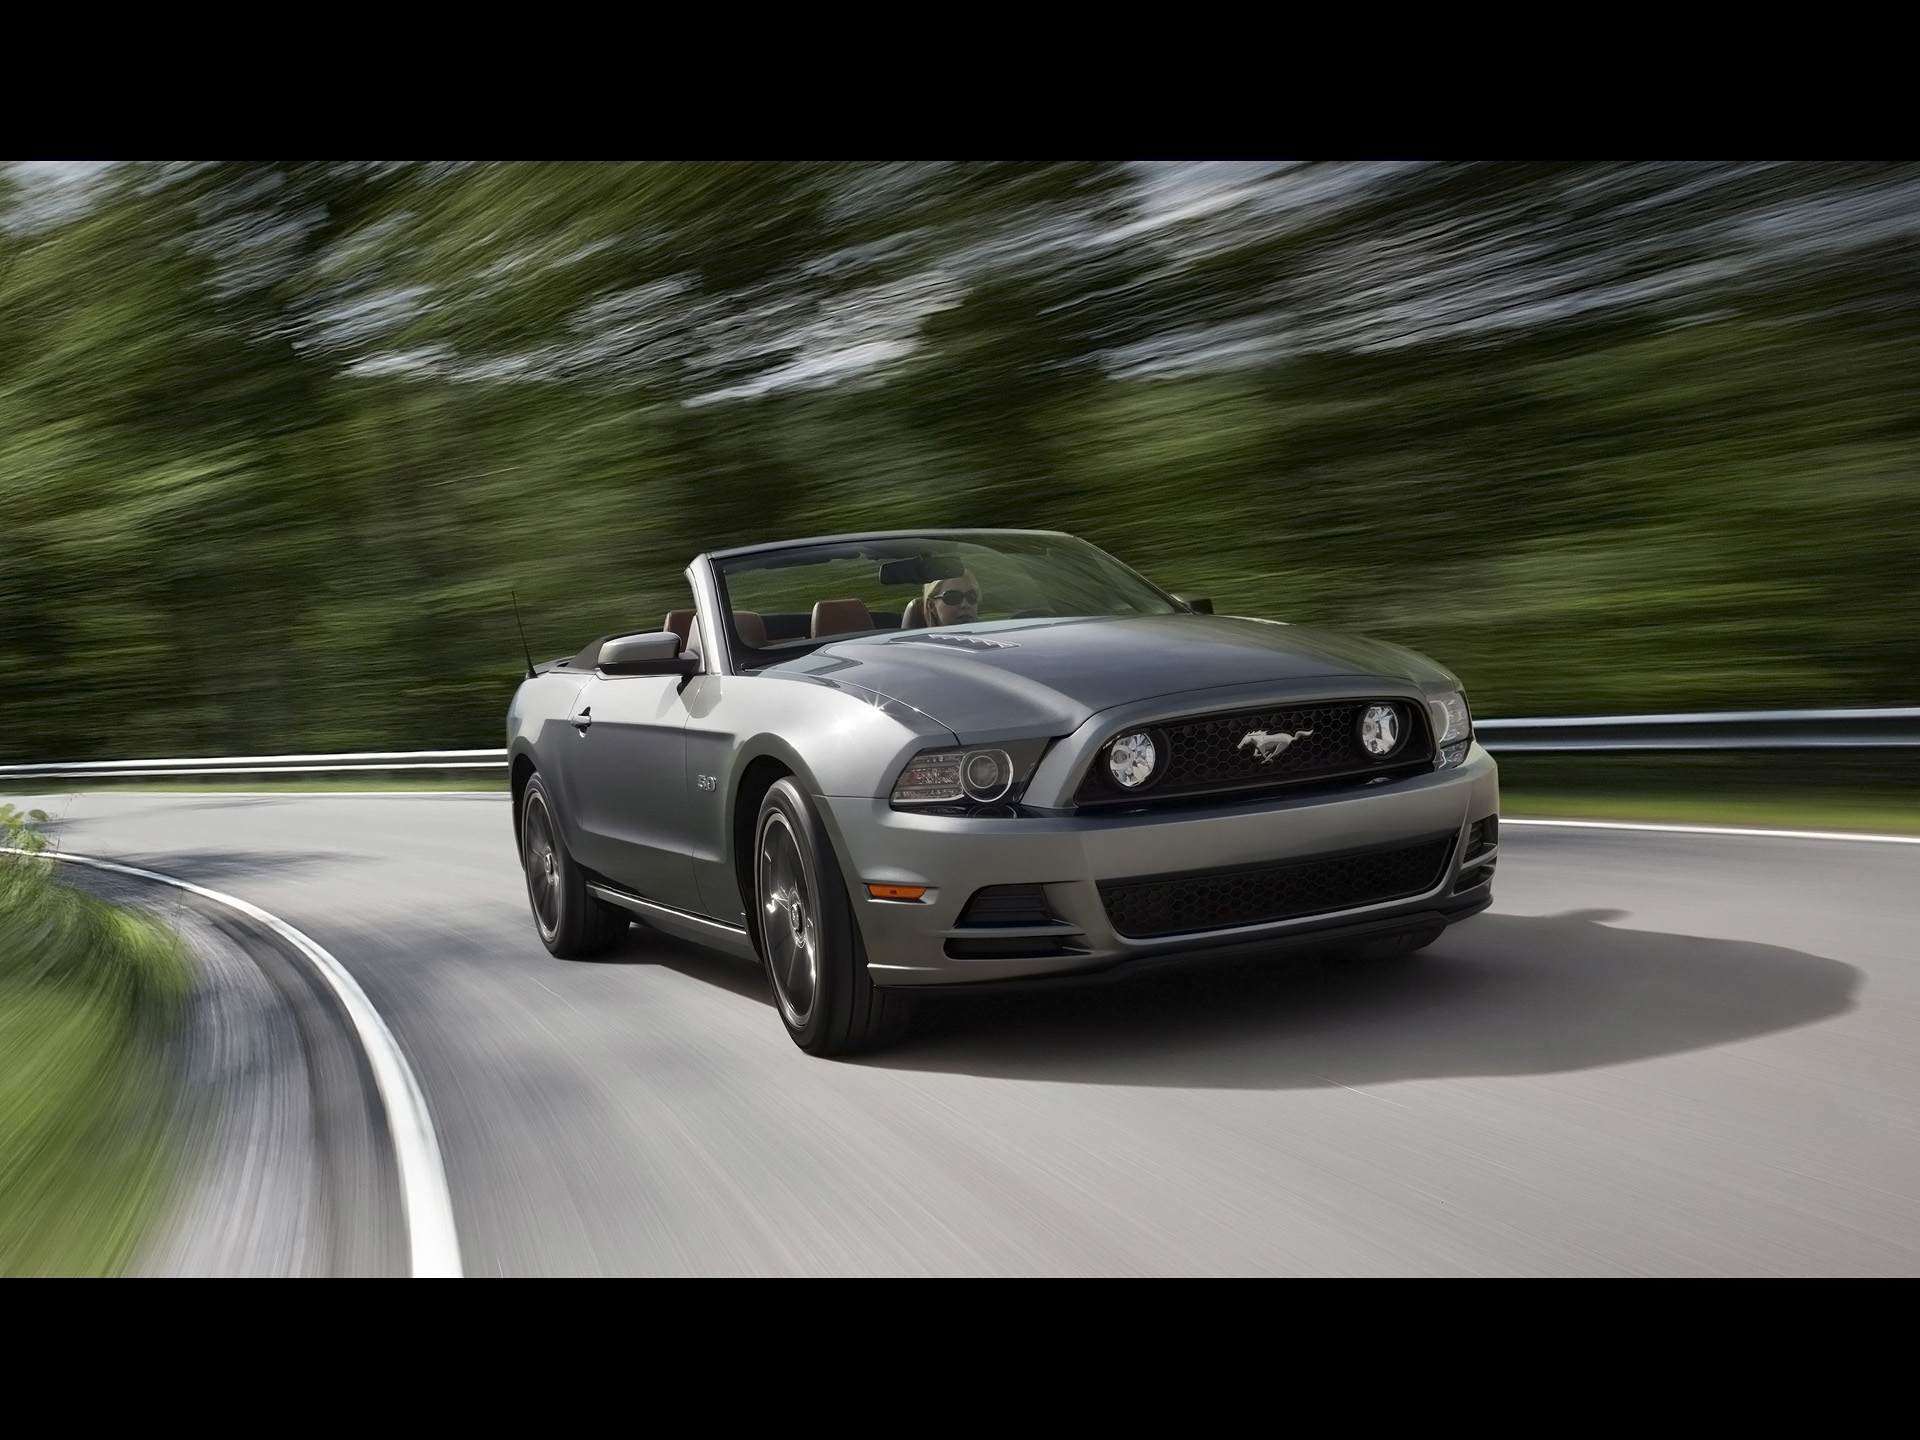  Ford Mustang wallpapers Ford Mustang stock photos